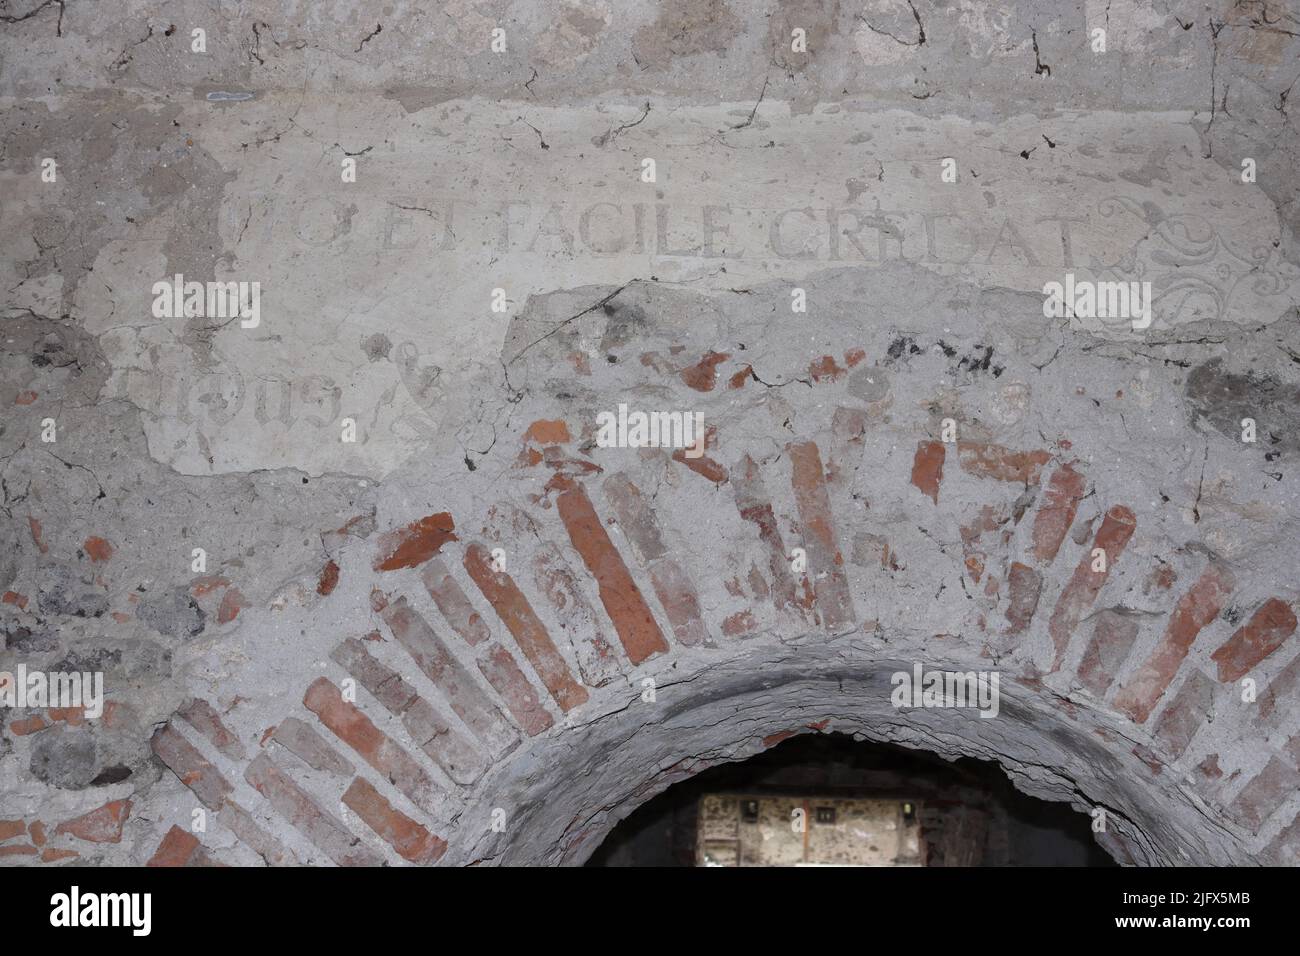 Registration of a message found on the unyul between the defamed walls that is located in Sukosd Bethlen castle Stock Photo